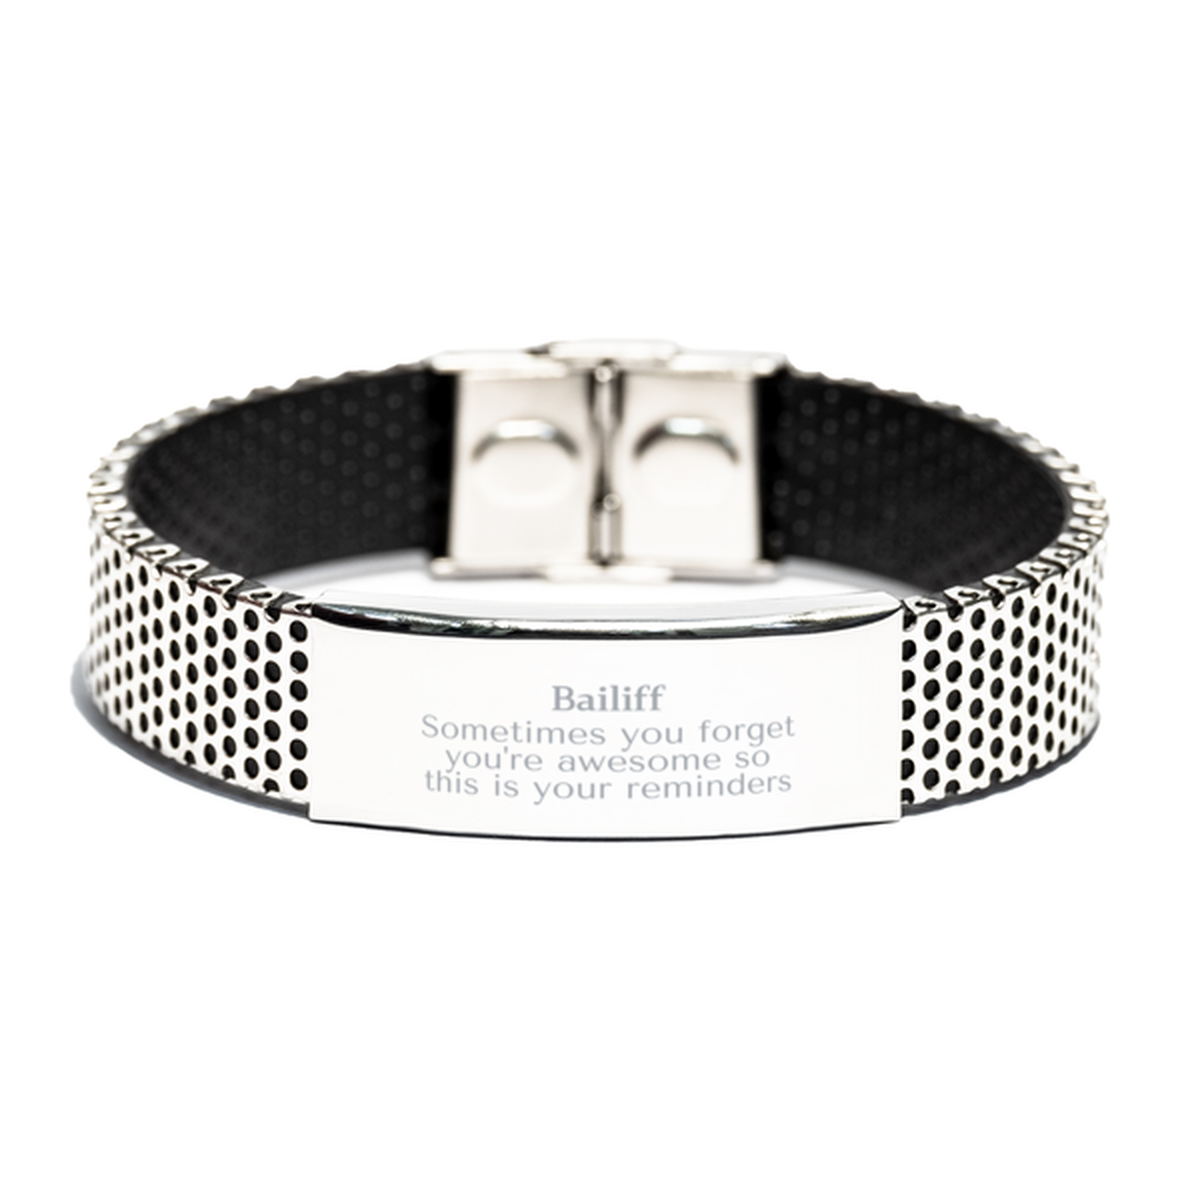 Sentimental Bailiff Stainless Steel Bracelet, Bailiff Sometimes you forget you're awesome so this is your reminders, Graduation Christmas Birthday Gifts for Bailiff, Men, Women, Coworkers